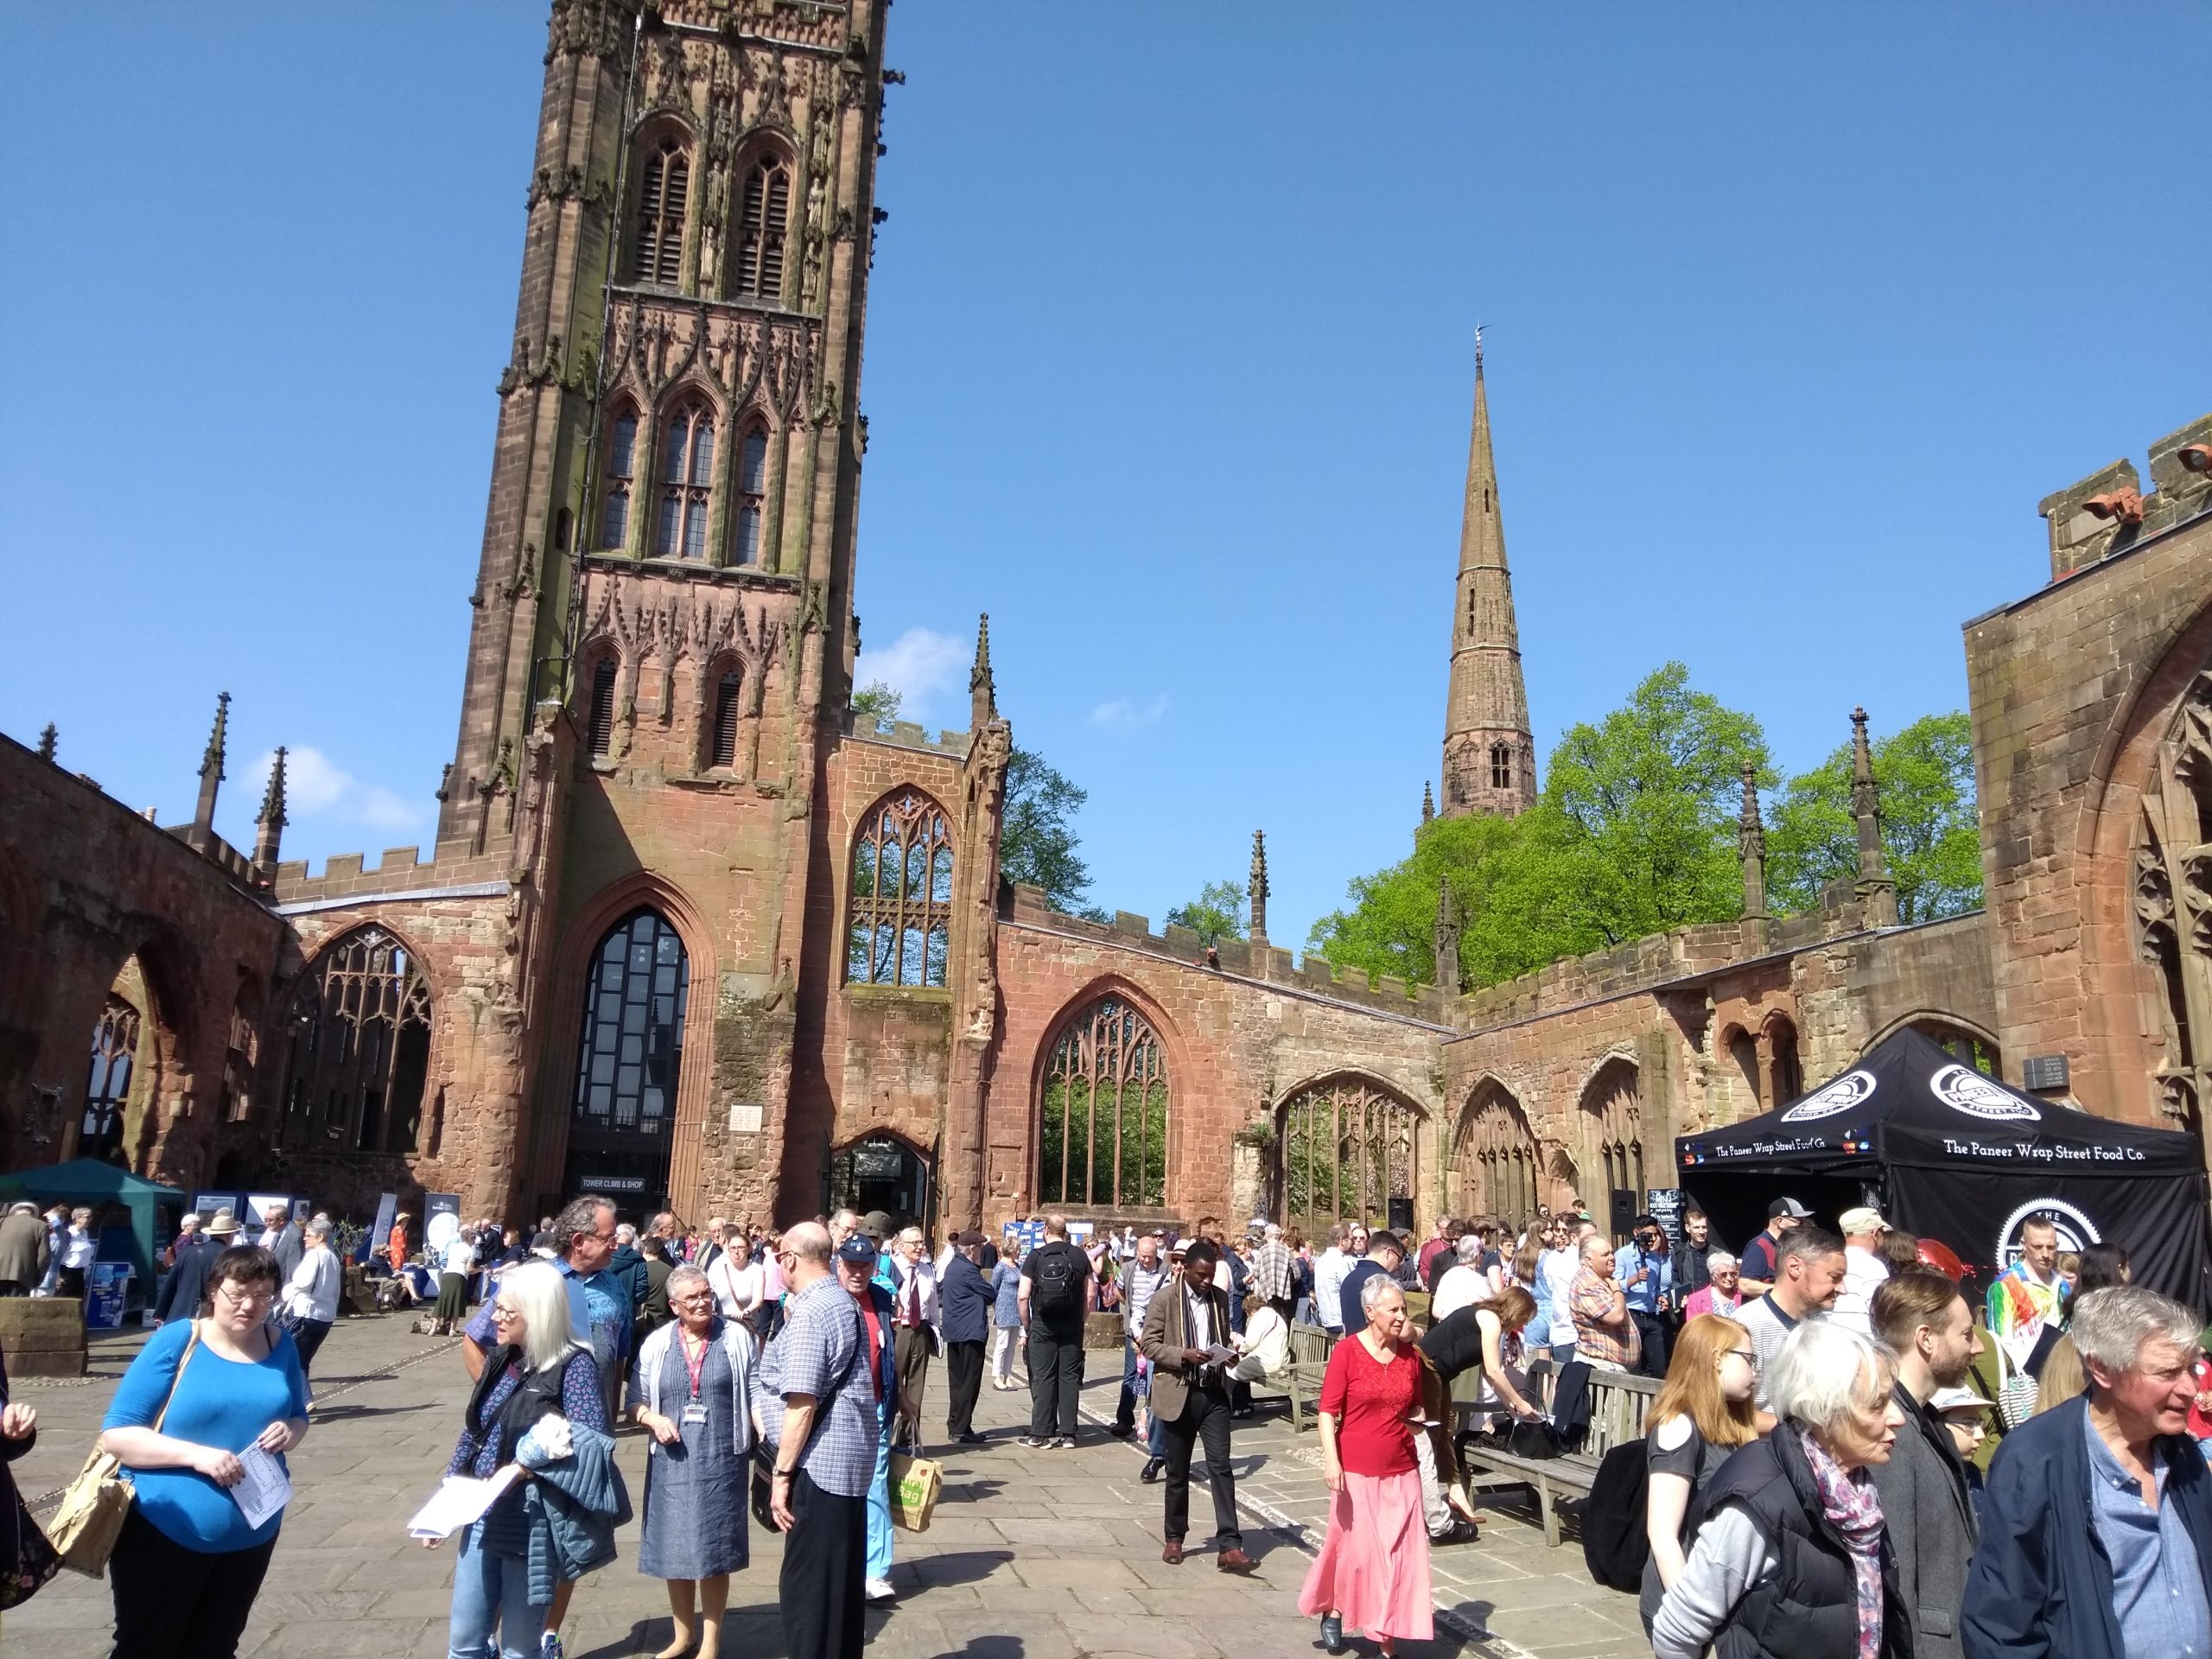 Community gathering in Coventry Old Cathedral